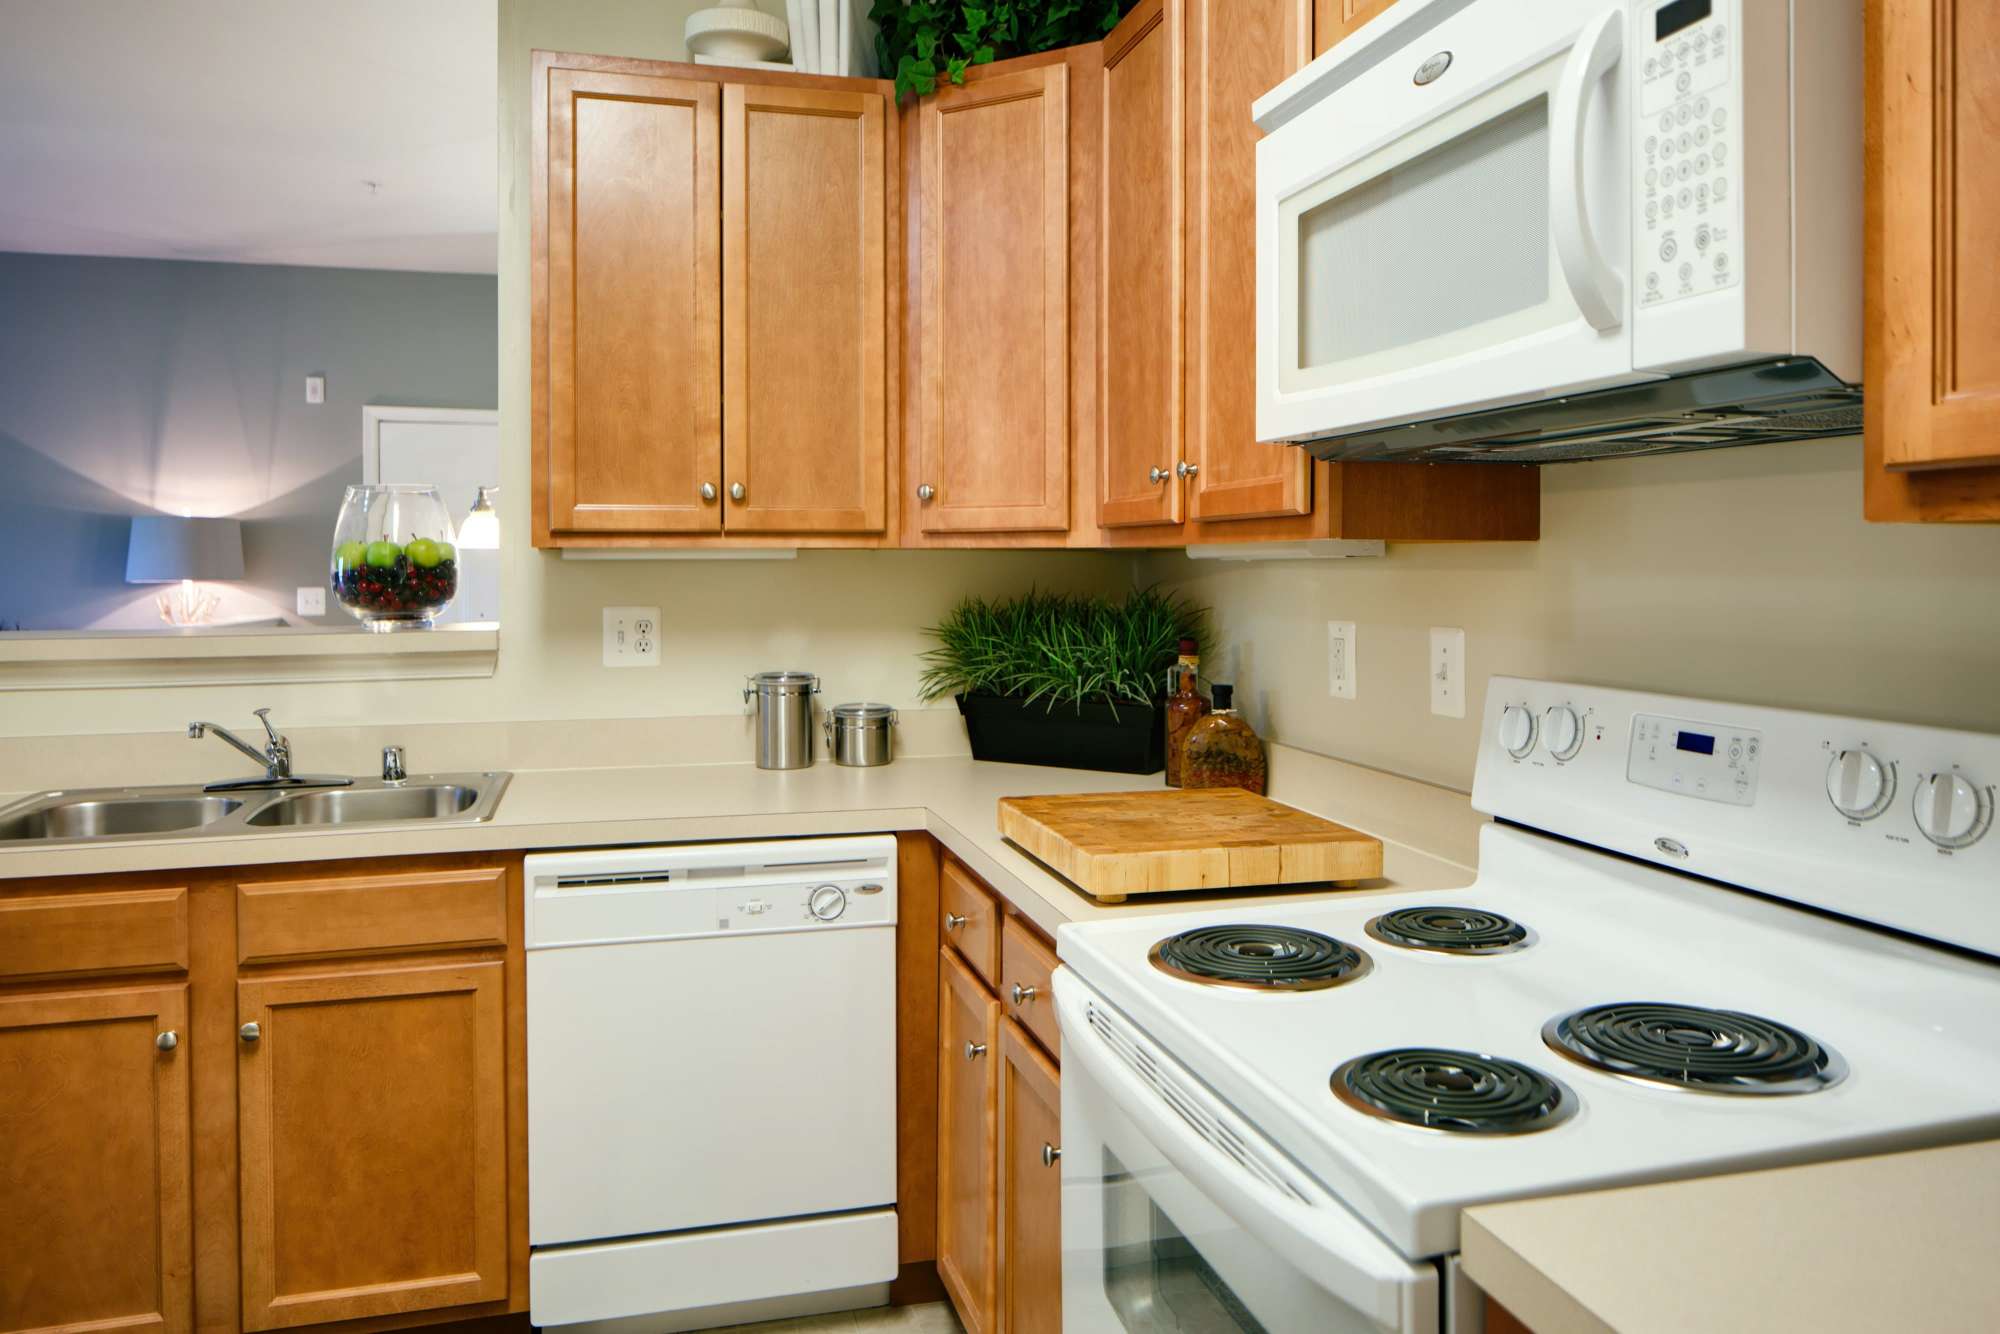 Chesapeake Ridge : From quick meals to culinary masterpieces, the kitchen is ready.